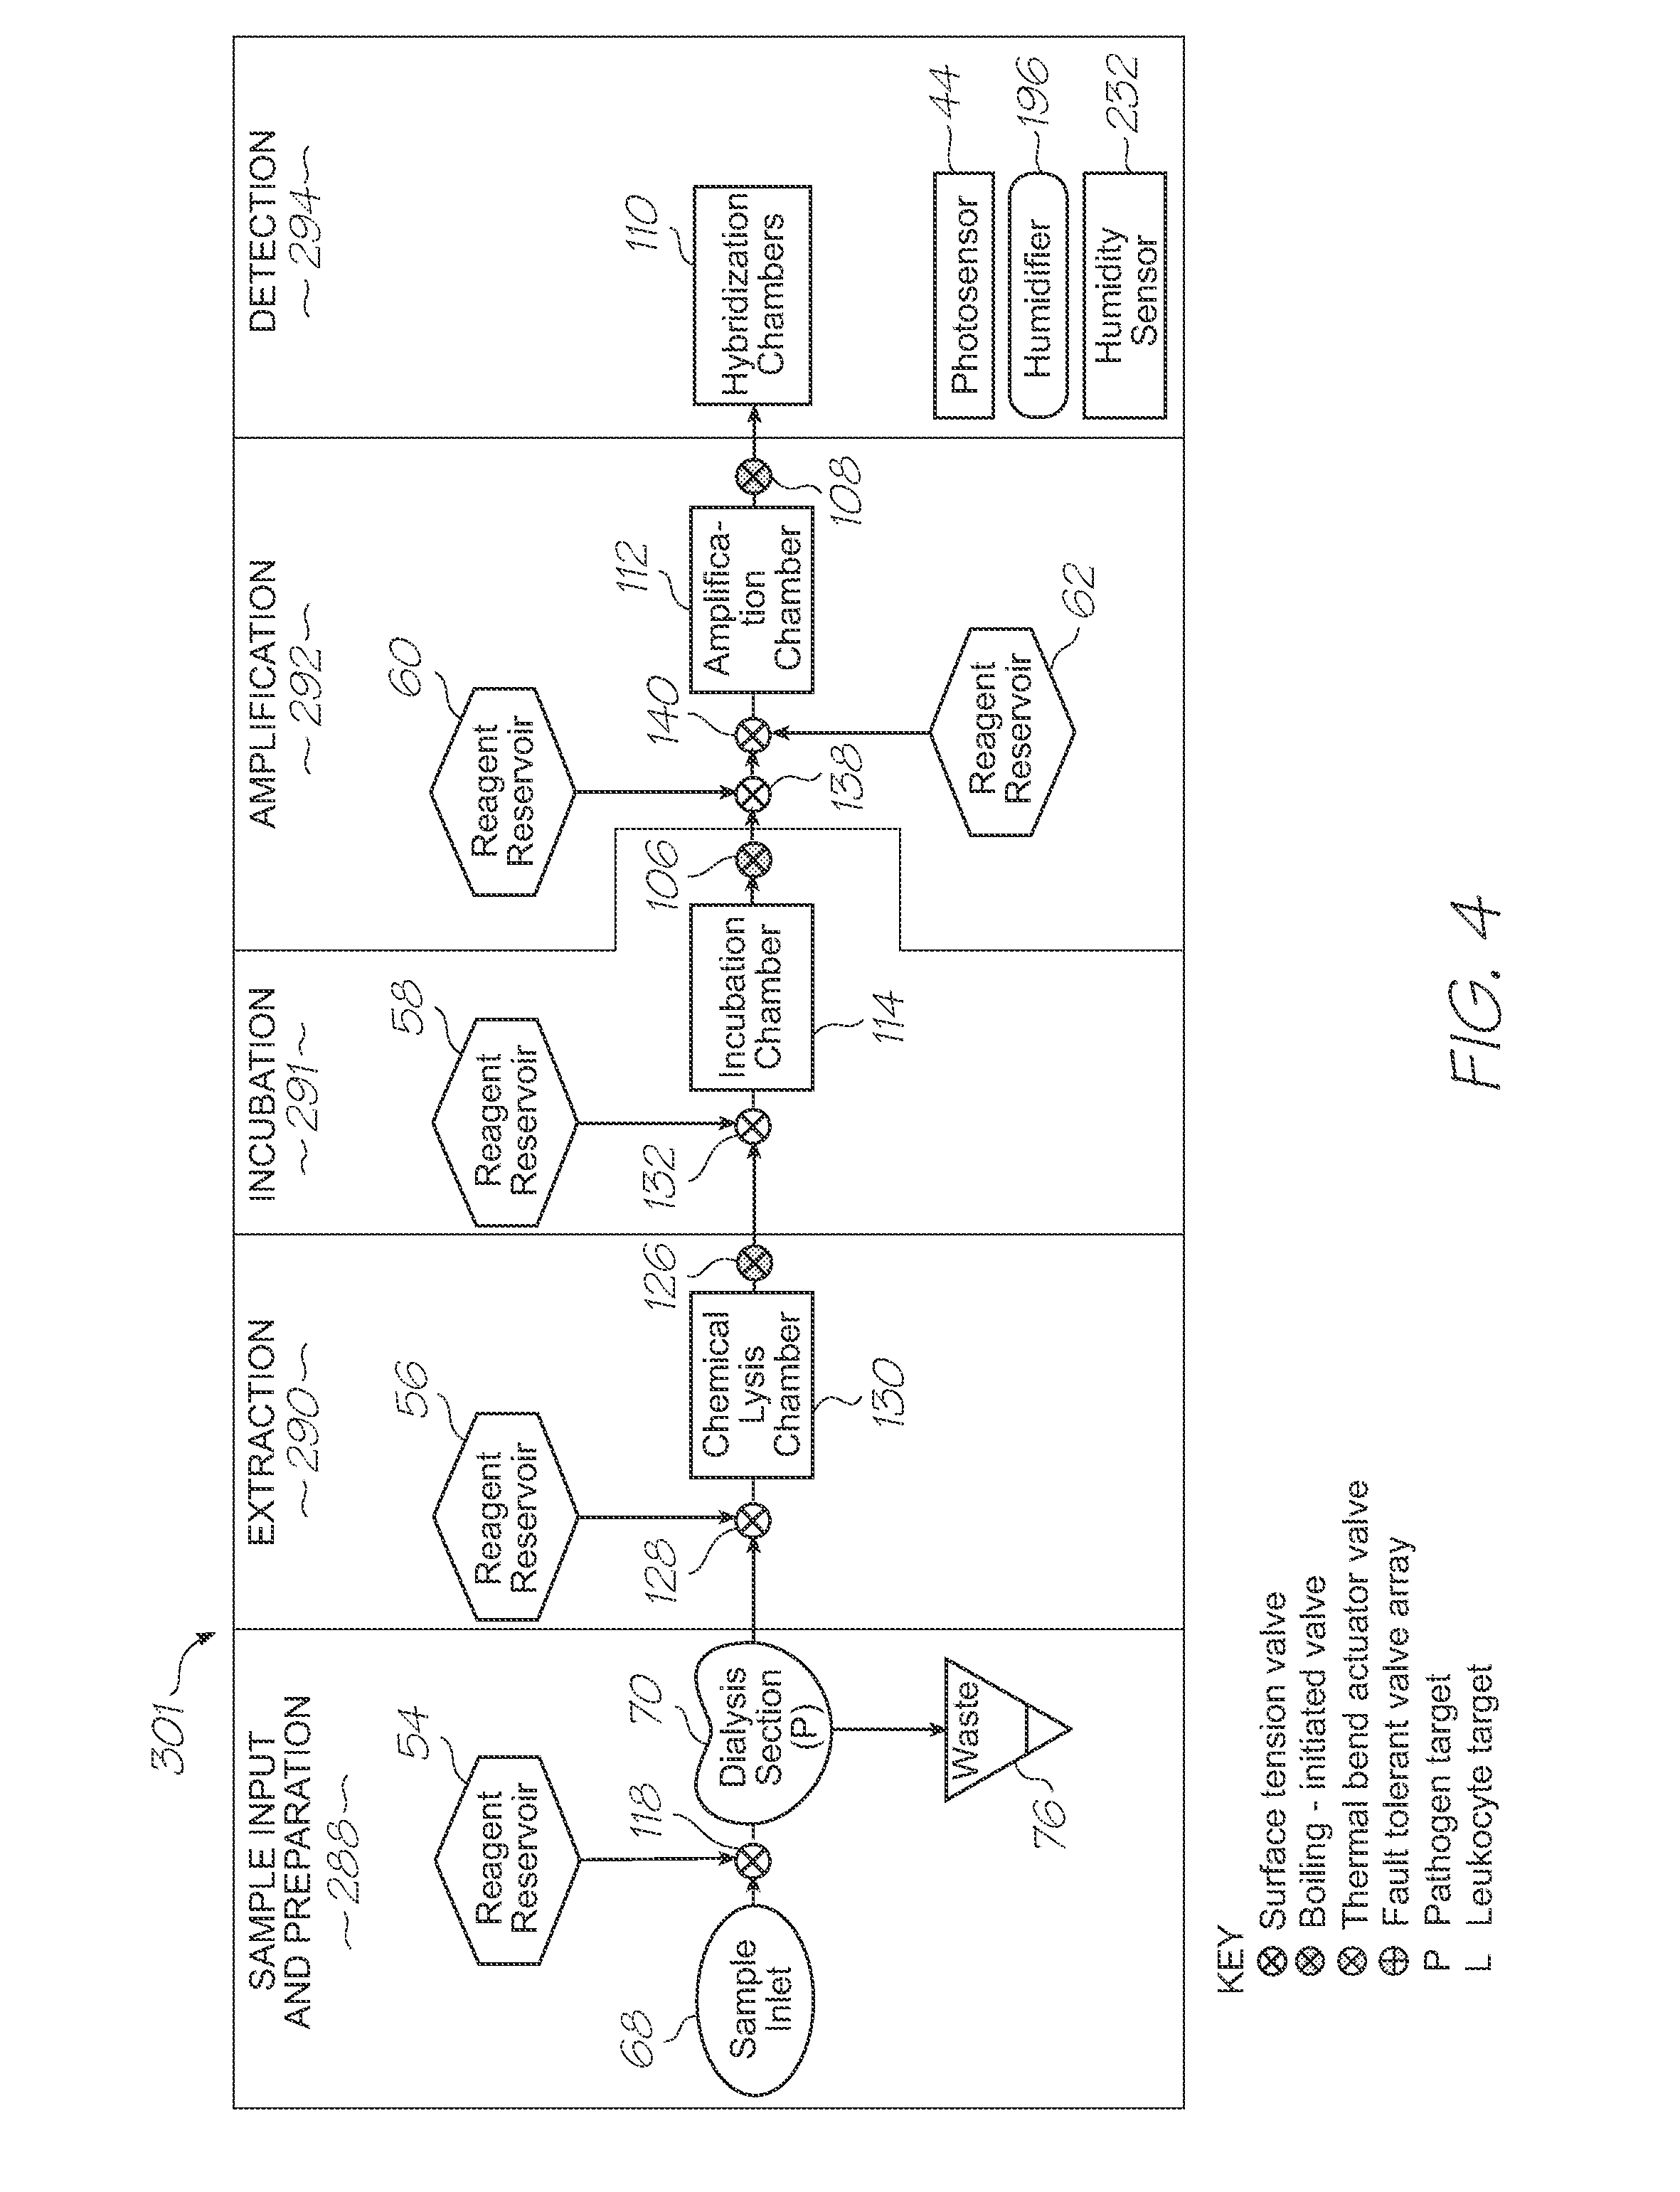 Microfluidic device with multi-layer dialysis section